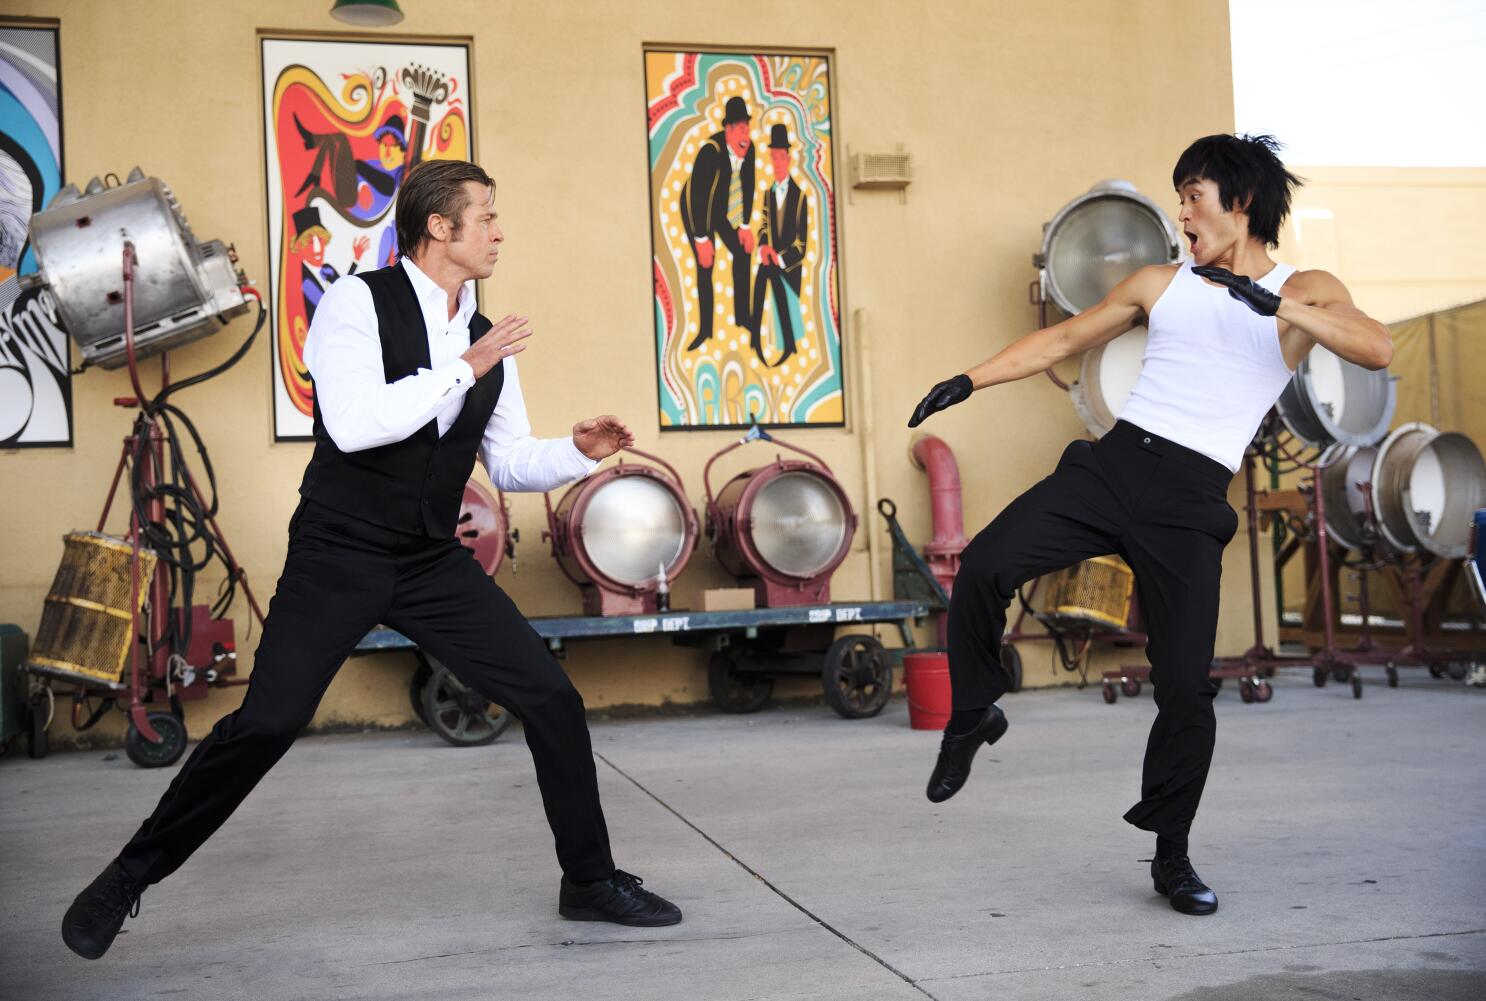 Why 'Once Upon a Time's' Bruce Lee cameo is problematic - Los Angeles Times